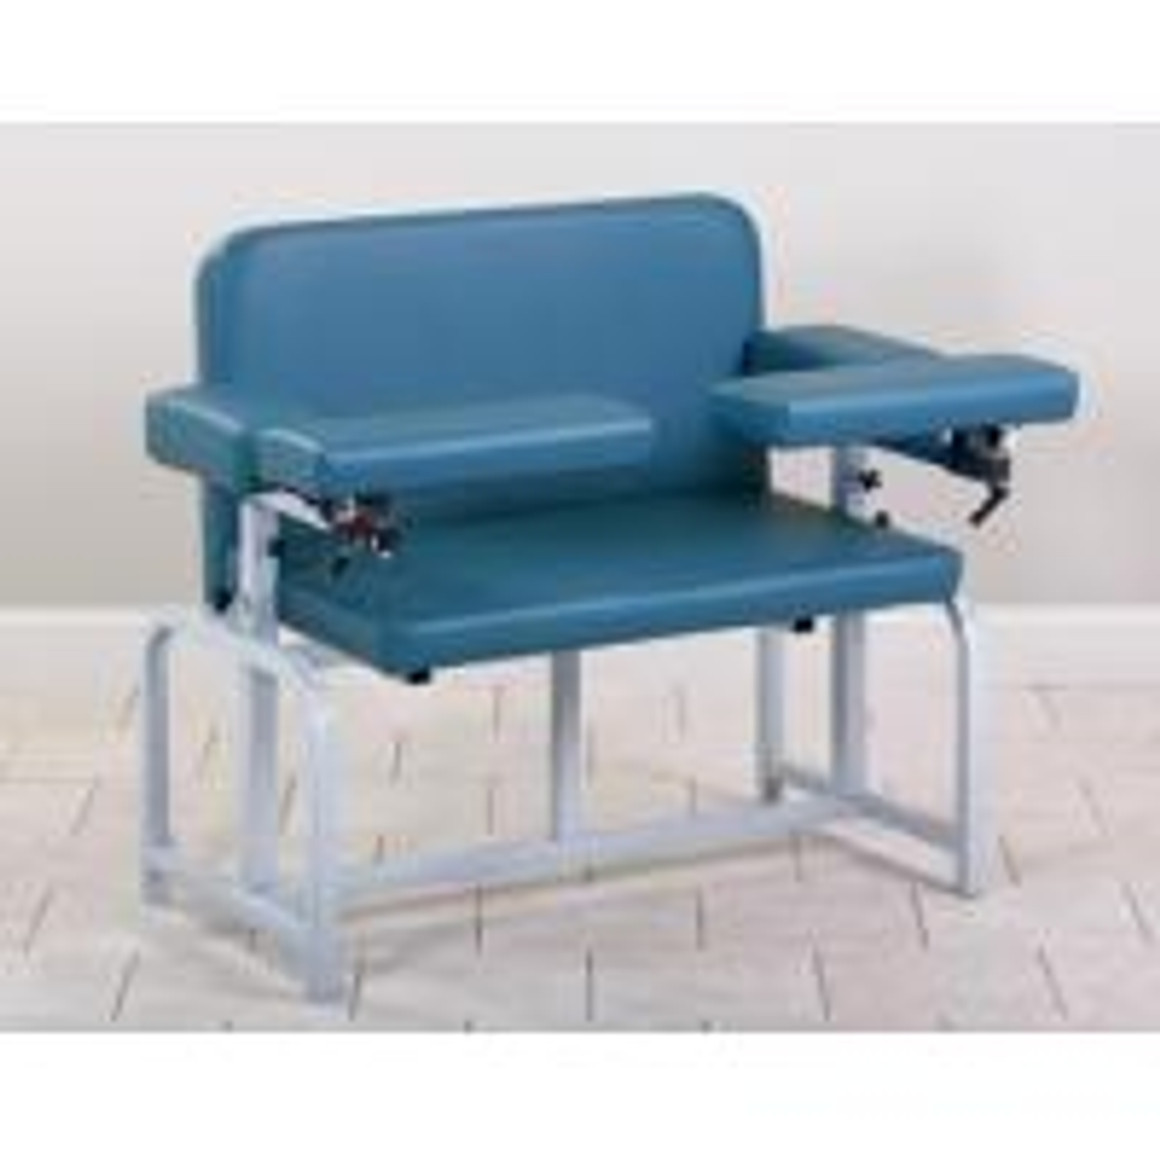 Clinton Bariatric Blood Drawing Chair with Flip-Arms, Aubergine